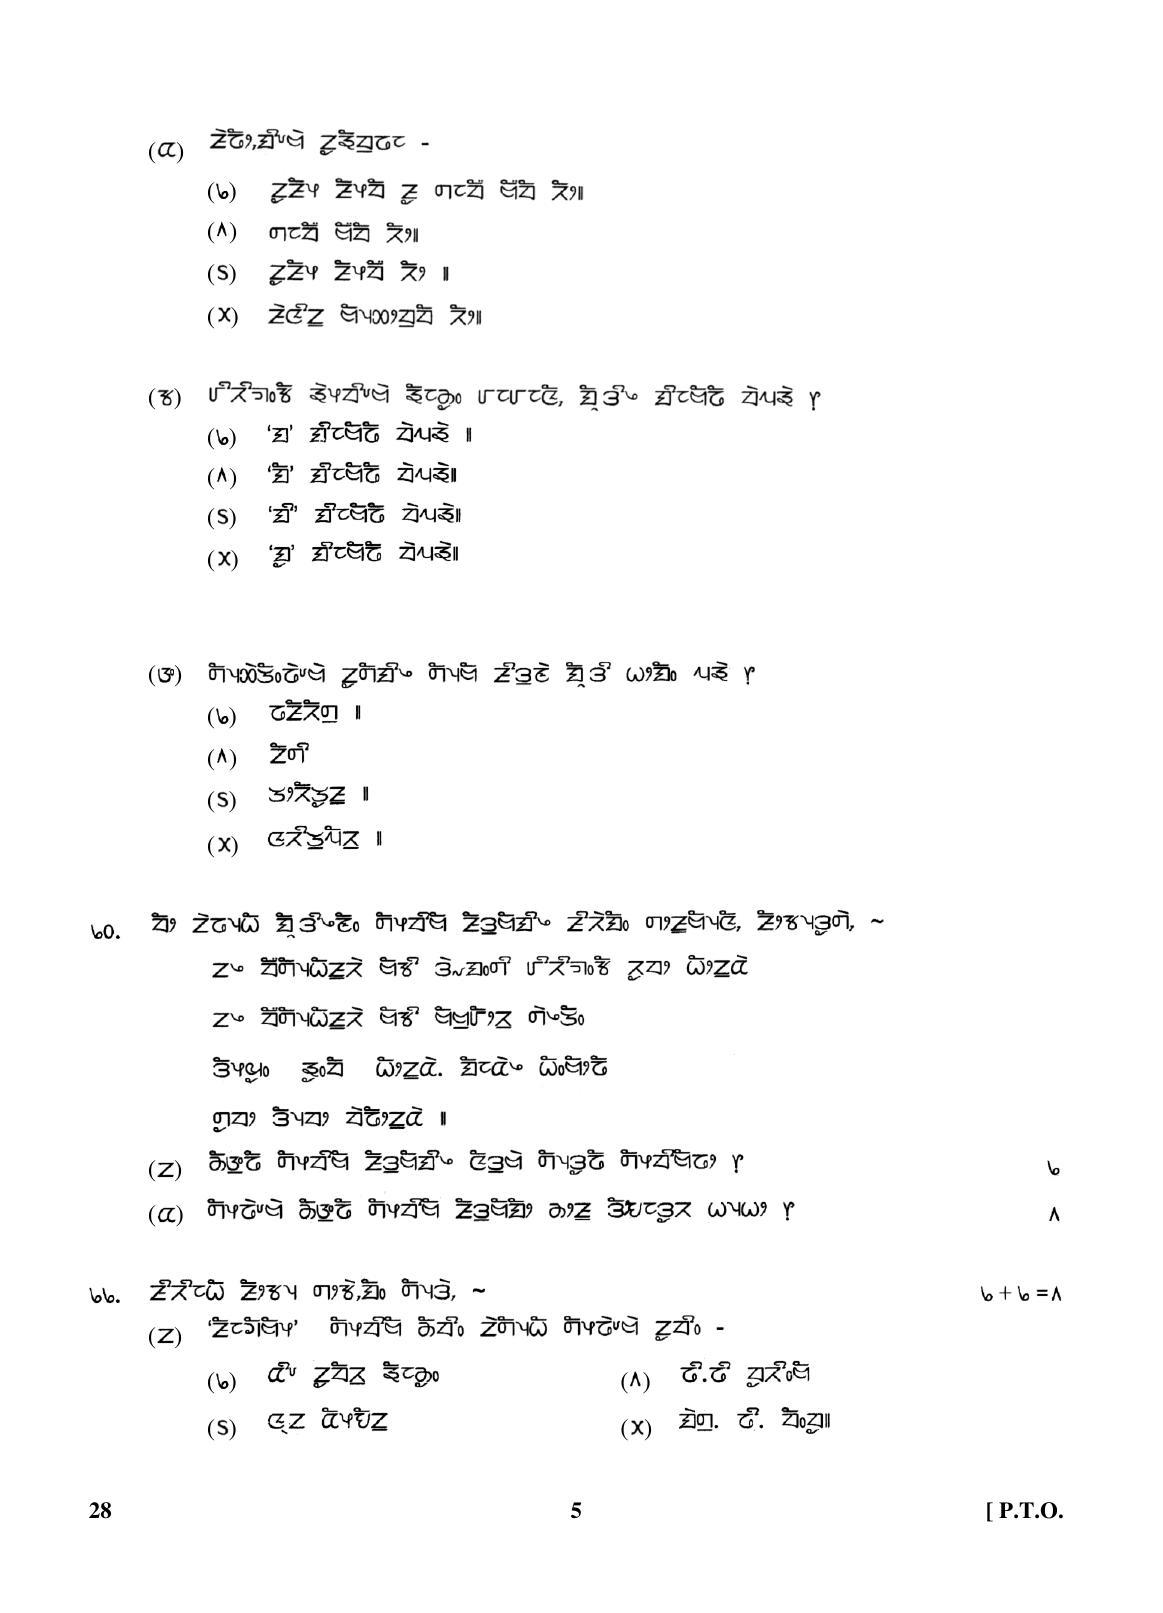 CBSE Class 10 28 (Limboo) 2018 Question Paper - Page 5